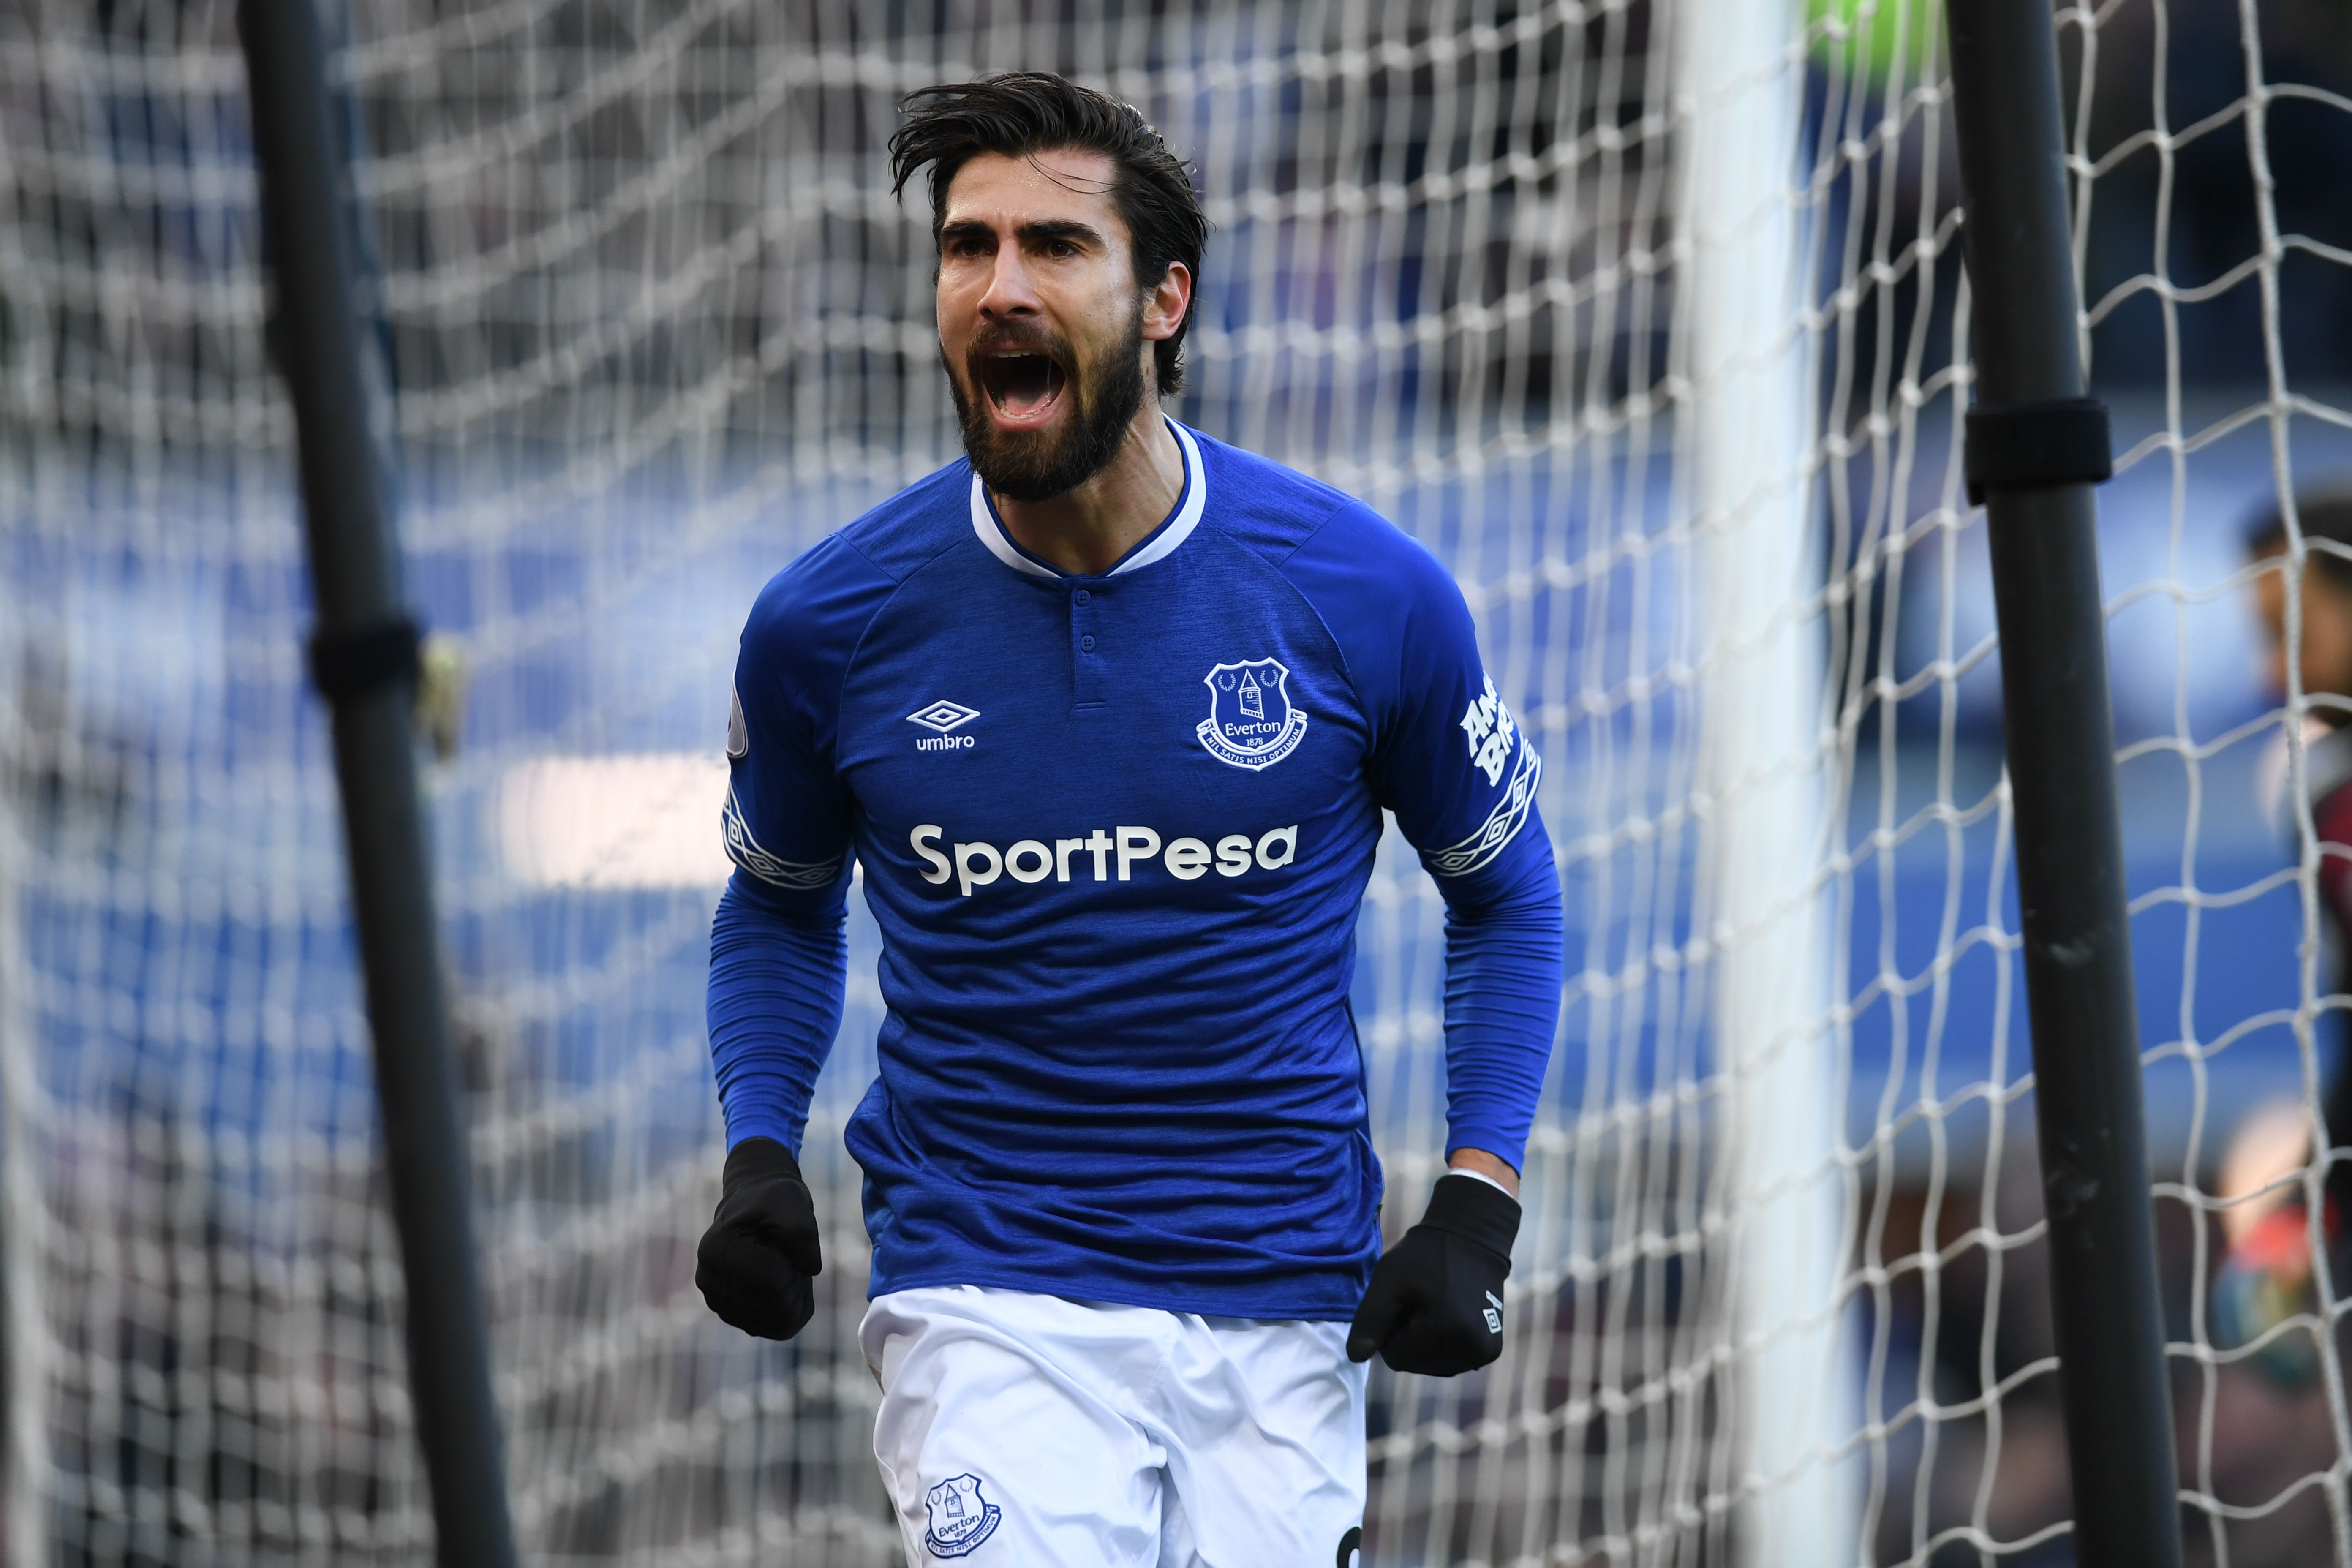 Everton's Portuguese midfielder André Gomes celebrates scoring their first goal to equalise 1-1 during the English Premier League football match between Everton and Wolverhampton Wanderers at Goodison Park in Liverpool, north west England on February 2, 2019. (Photo by Paul ELLIS / AFP) / RESTRICTED TO EDITORIAL USE. No use with unauthorized audio, video, data, fixture lists, club/league logos or 'live' services. Online in-match use limited to 120 images. An additional 40 images may be used in extra time. No video emulation. Social media in-match use limited to 120 images. An additional 40 images may be used in extra time. No use in betting publications, games or single club/league/player publications. /         (Photo credit should read PAUL ELLIS/AFP/Getty Images)